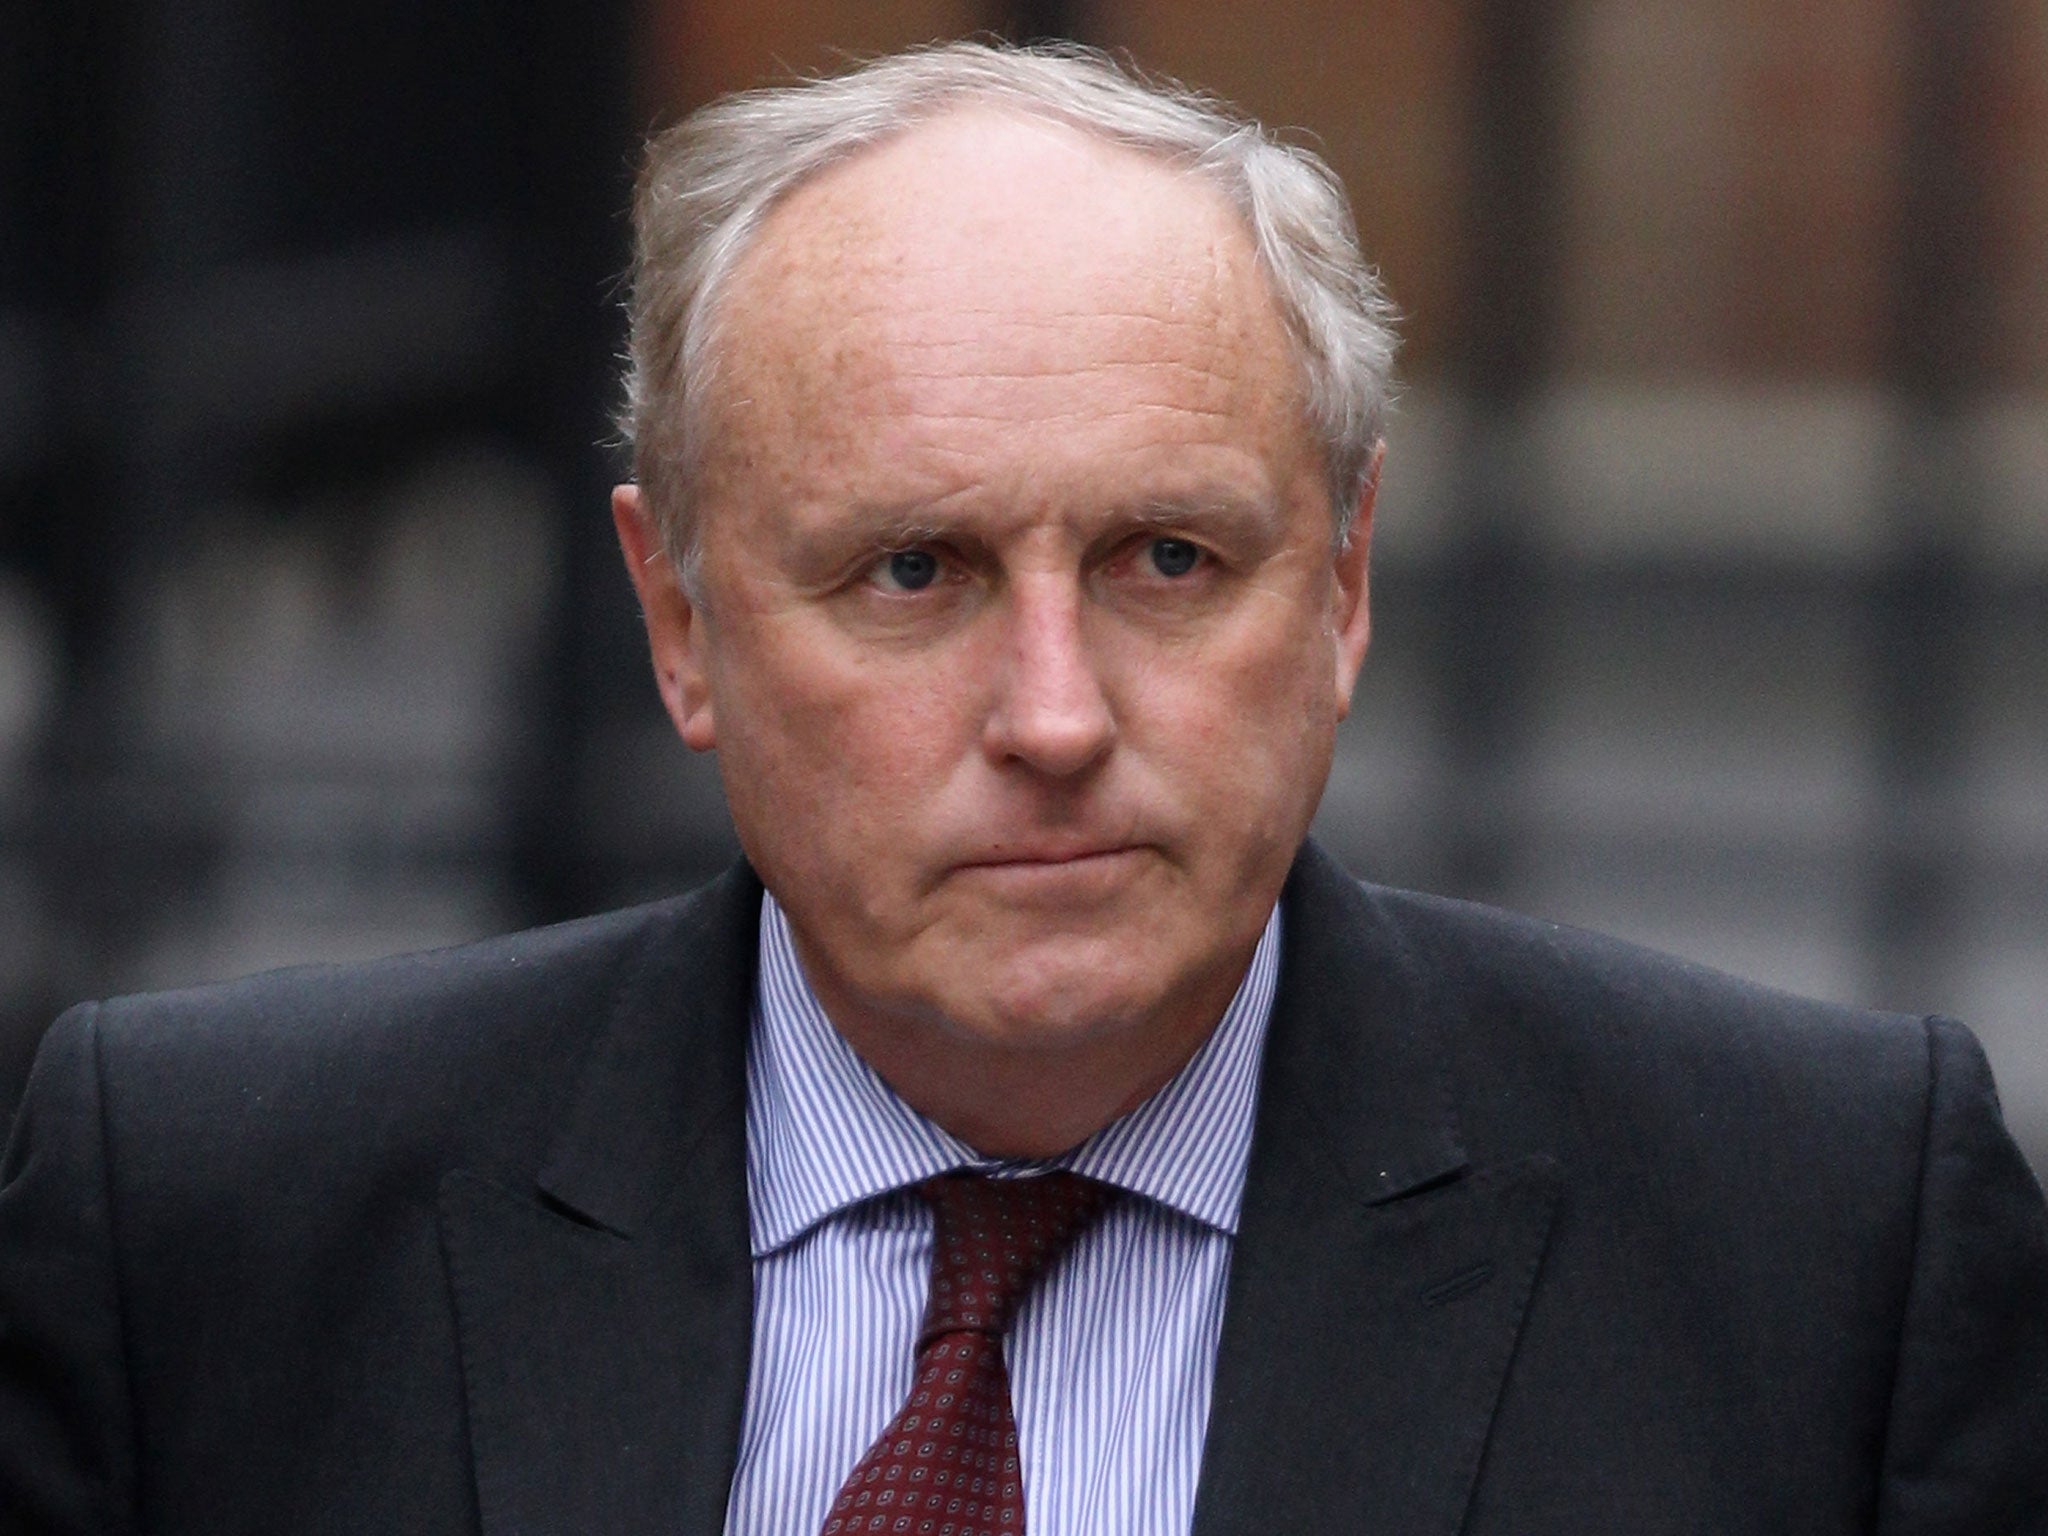 Dacre is strong meat, especially for those of us who find his general influence on public life to have been a net negative